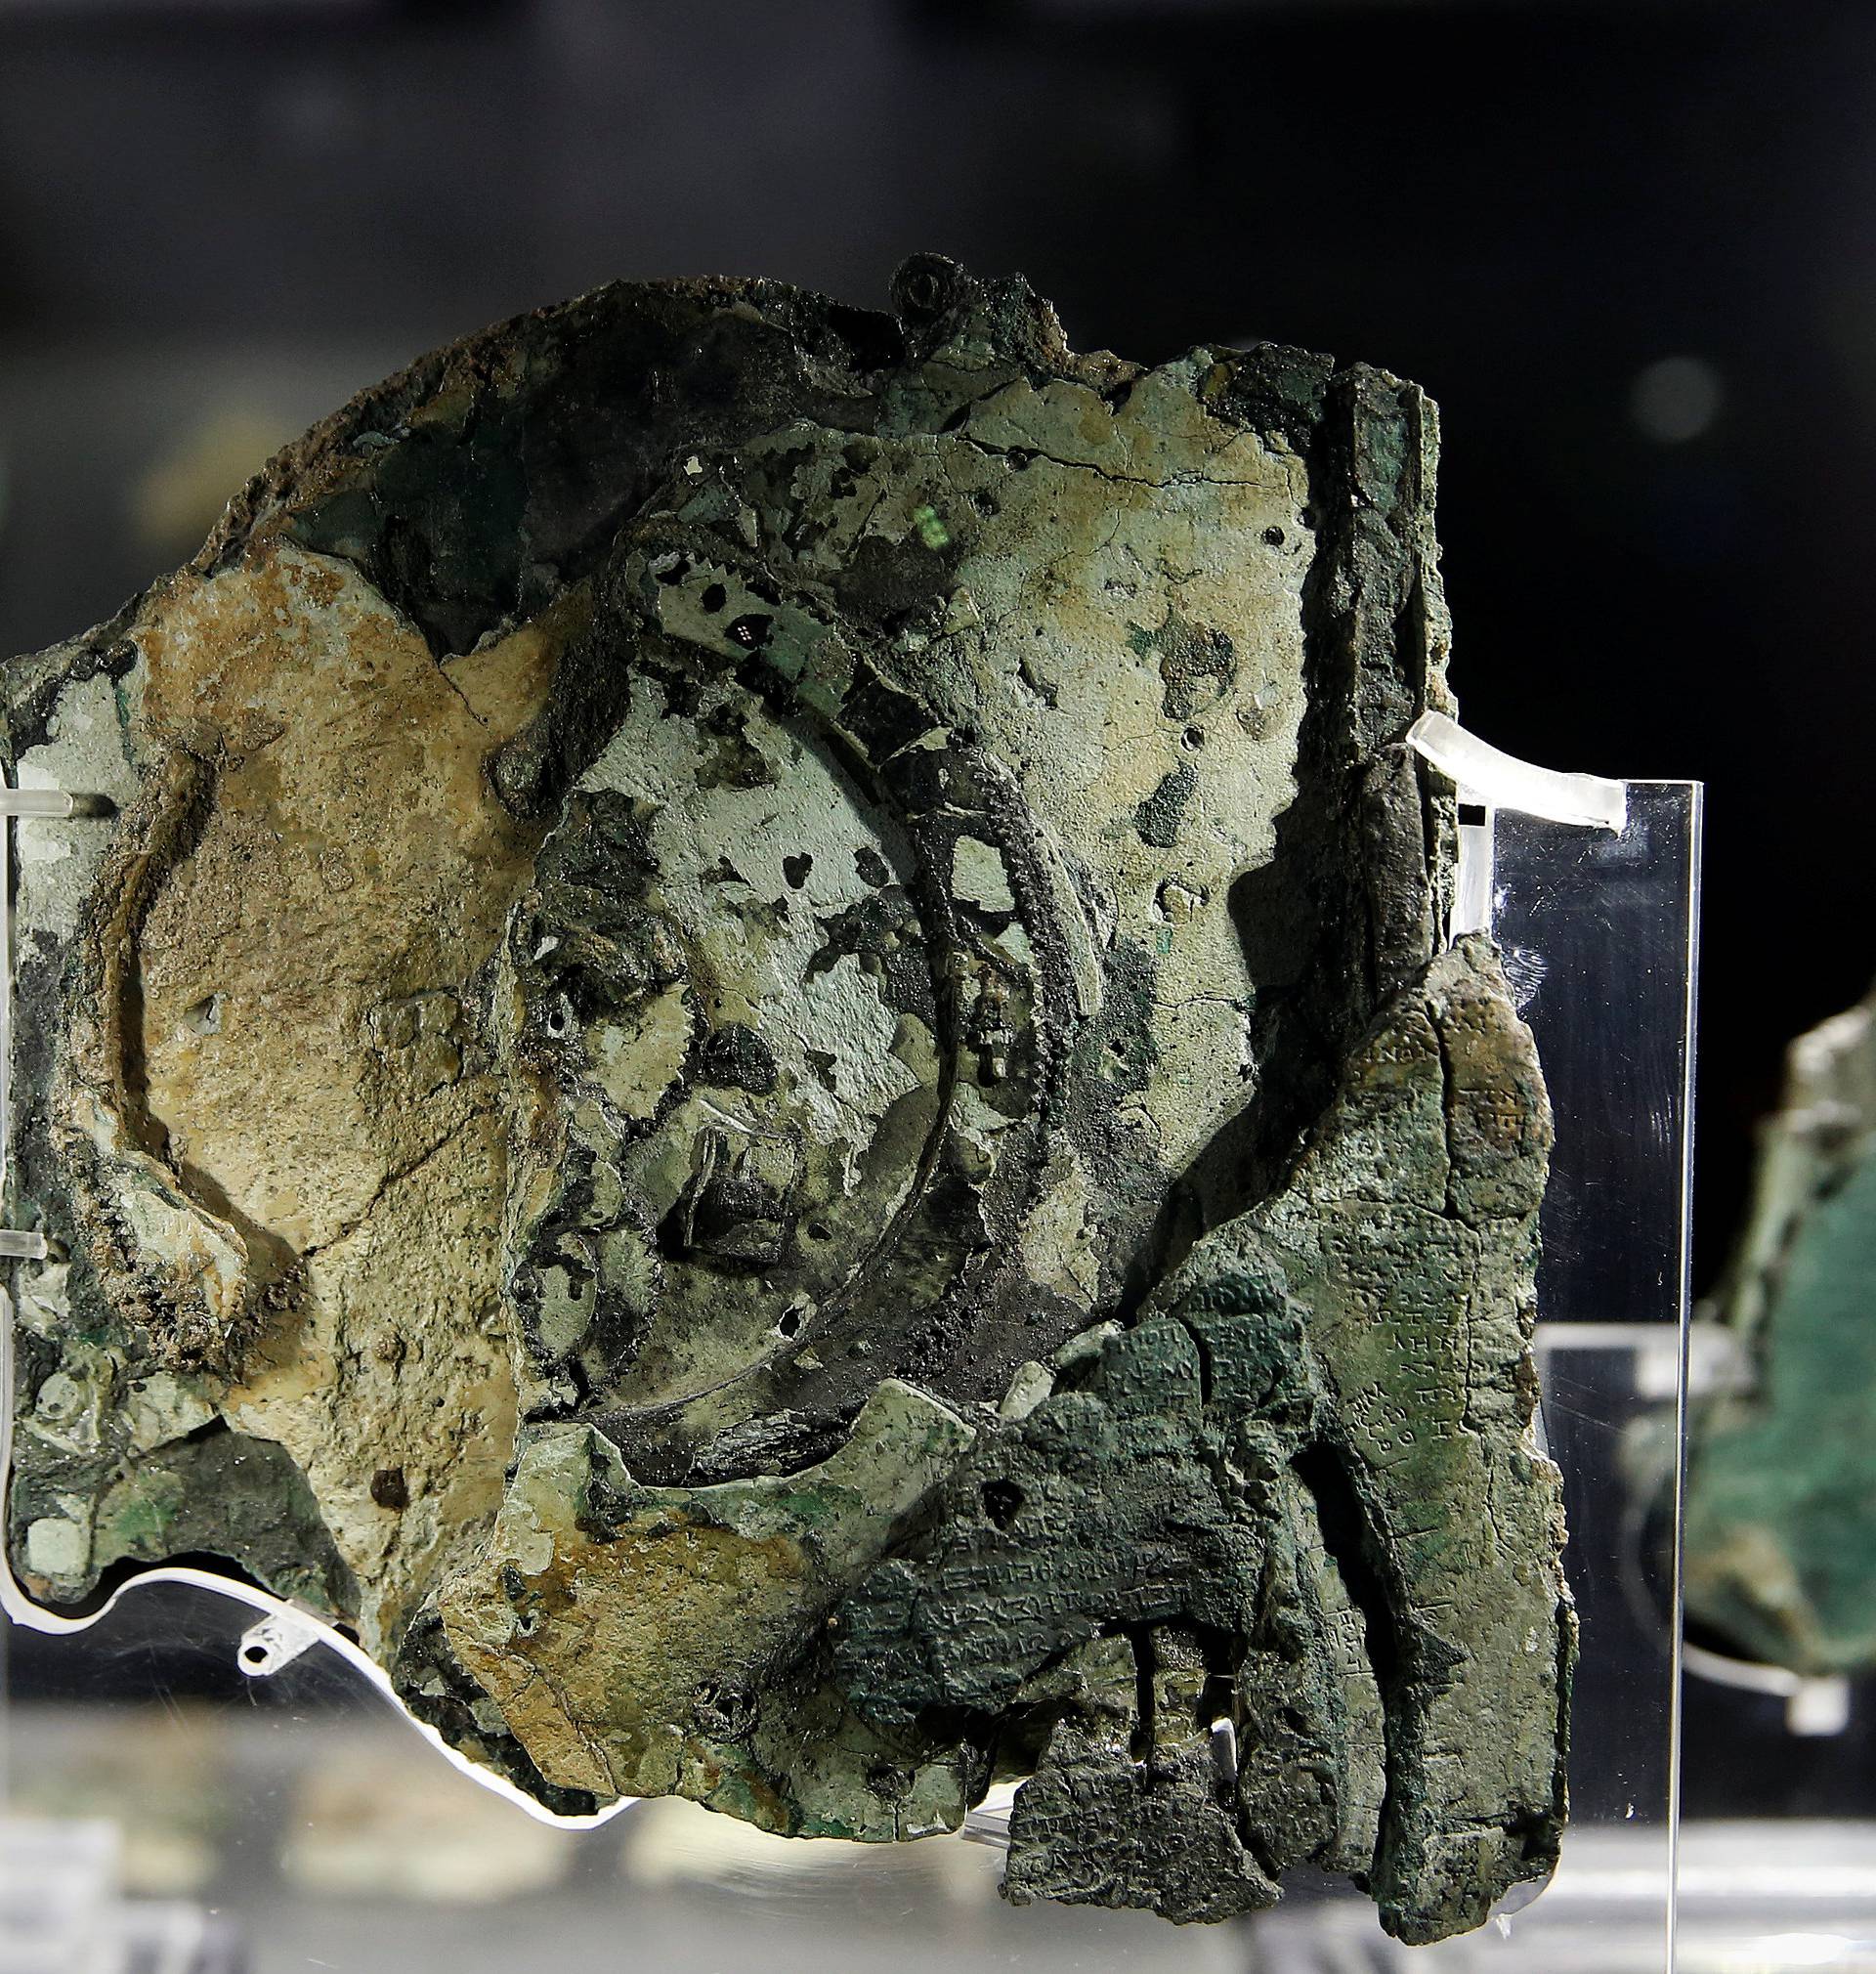 Fragments of the ancient Antikythera Mechanism are displayed at the National Archaeological Museum in Athens